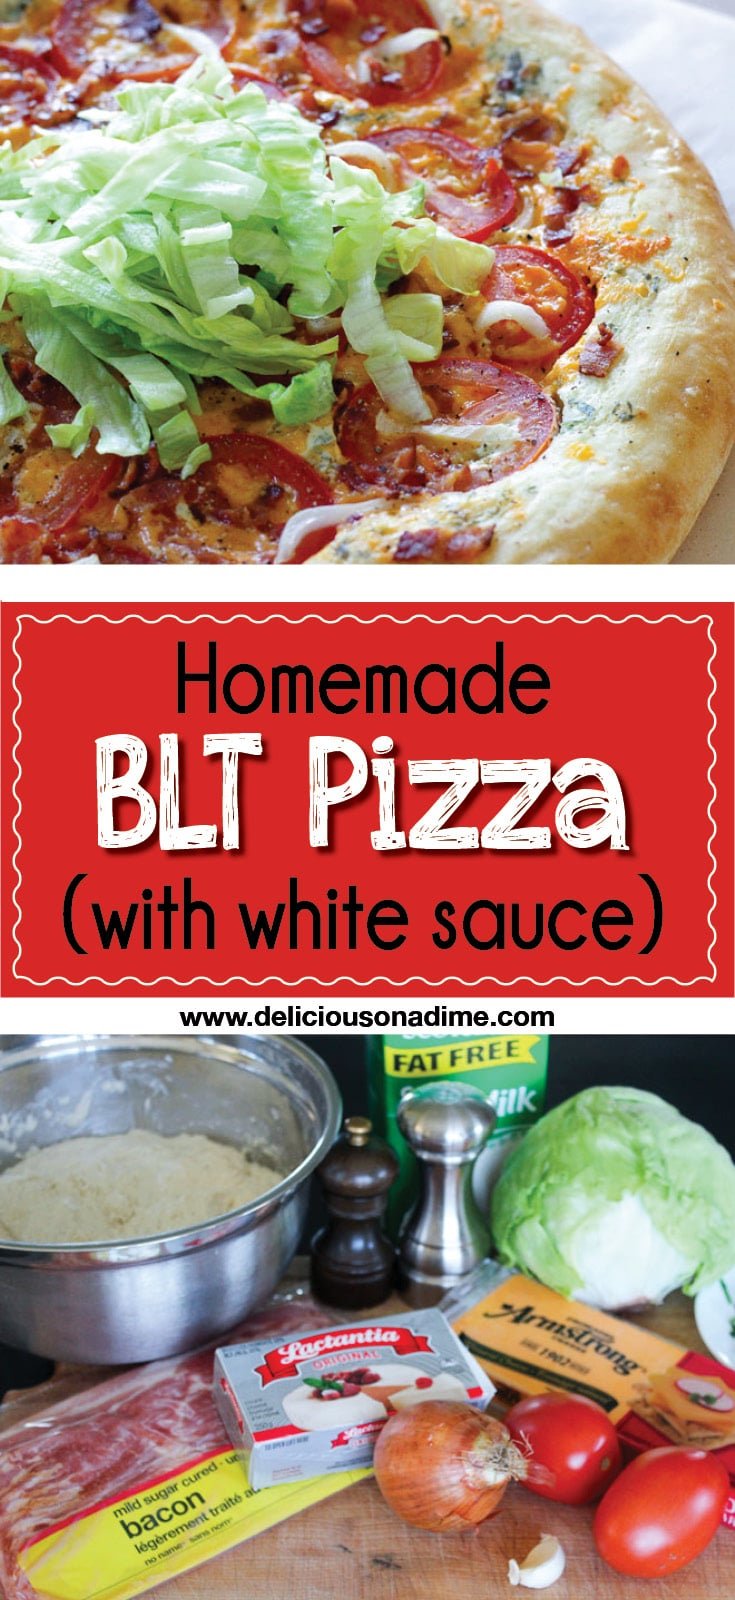 This Homemade BLT Pizza (with white sauce) recipe is a refreshing new spin on everyone's beloved classic BLT. Smoky bacon, fresh tomatoes, crunchy lettuce and a creamy white sauce will make this homemade pizza your new favourite way to enjoy a BLT.